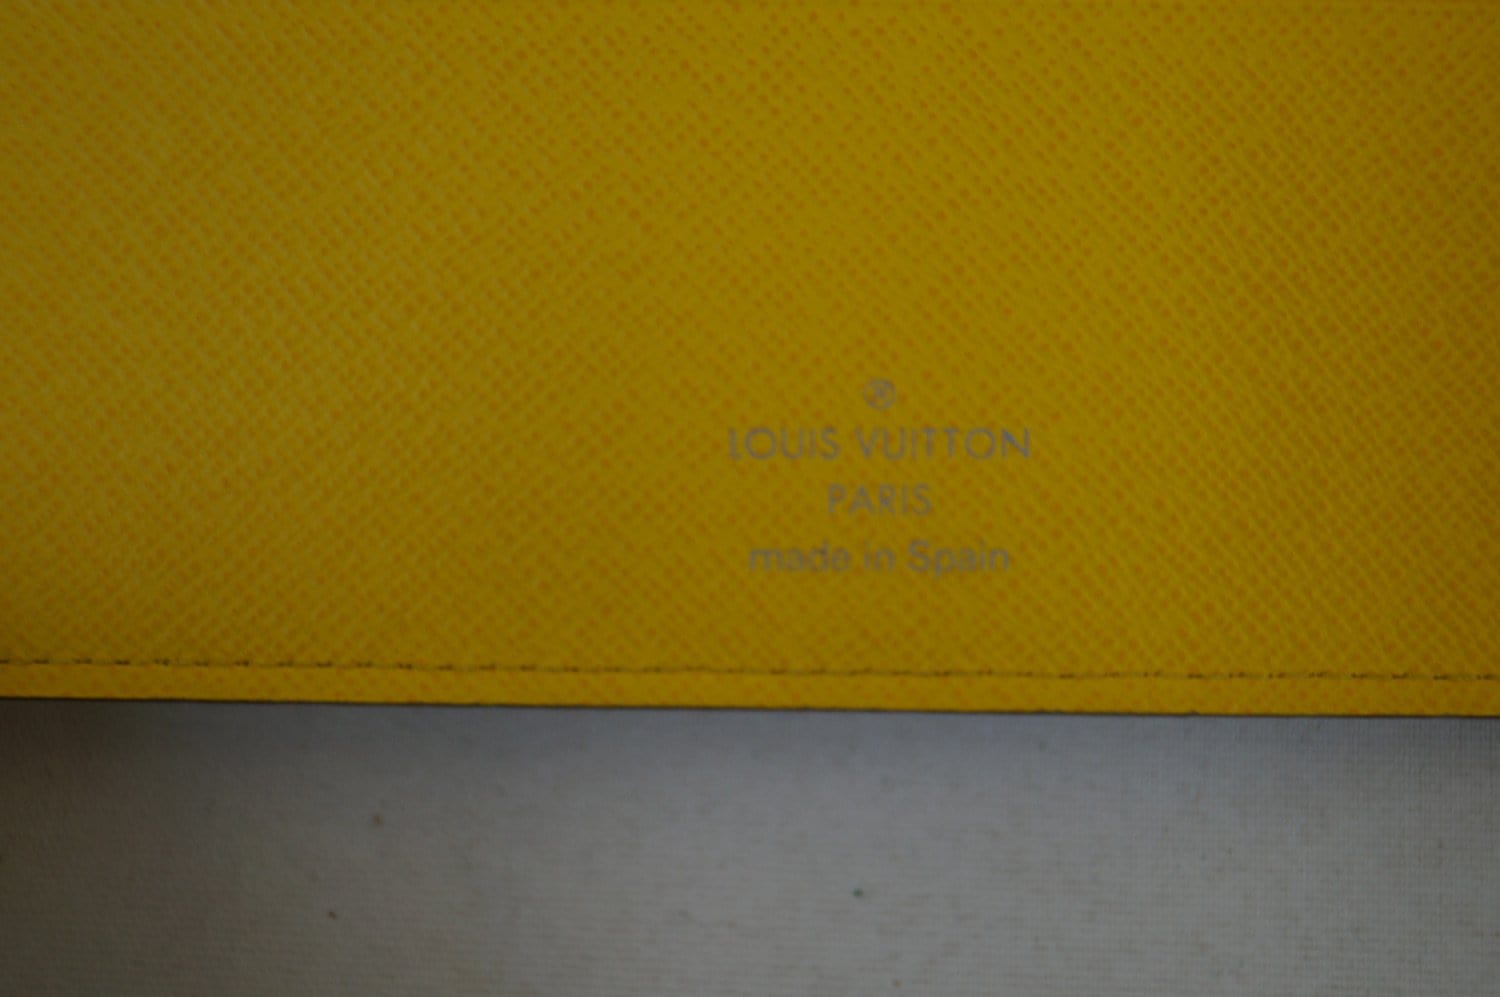 LOUIS VUITTON Insolite Monogram with Green Interior Wallet – The Luxury Lady